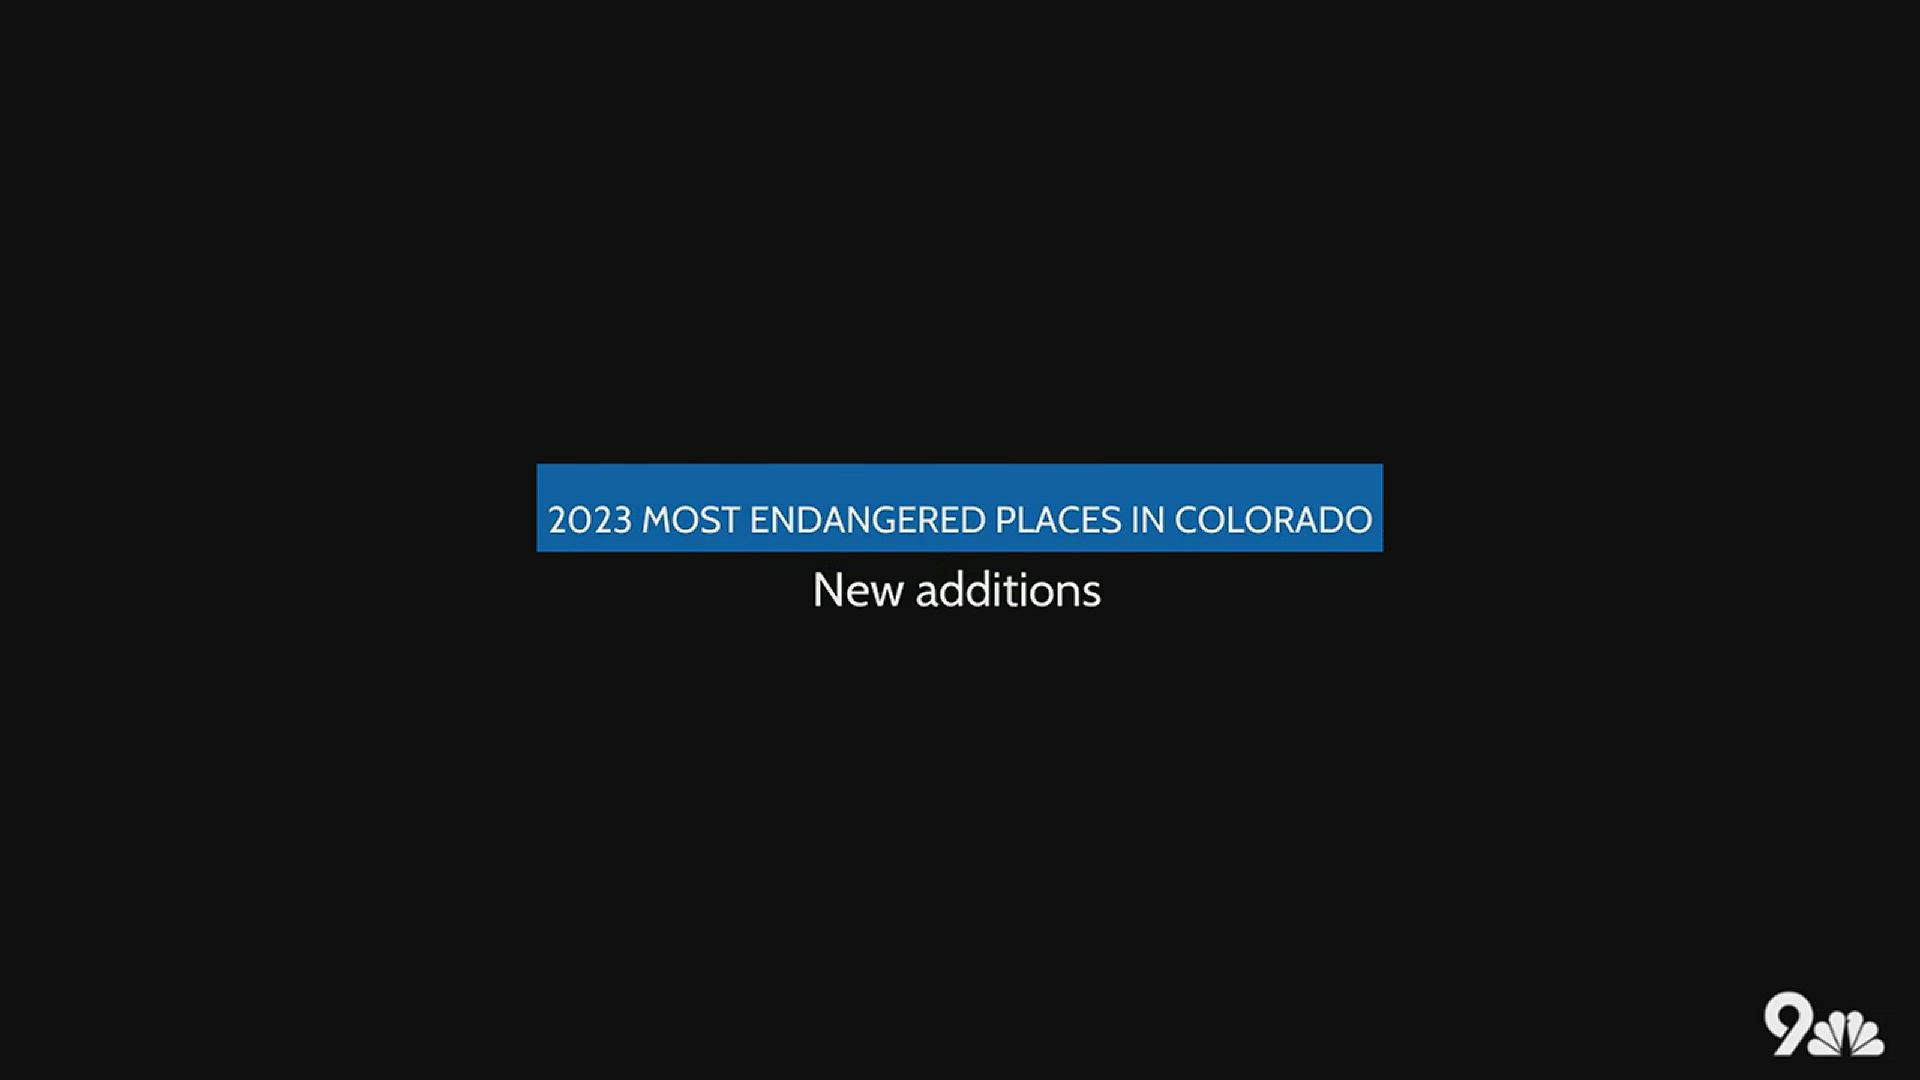 Colorado Preservation, Inc. also said that one site on the Most Endangered Places list was saved, and another was lost.